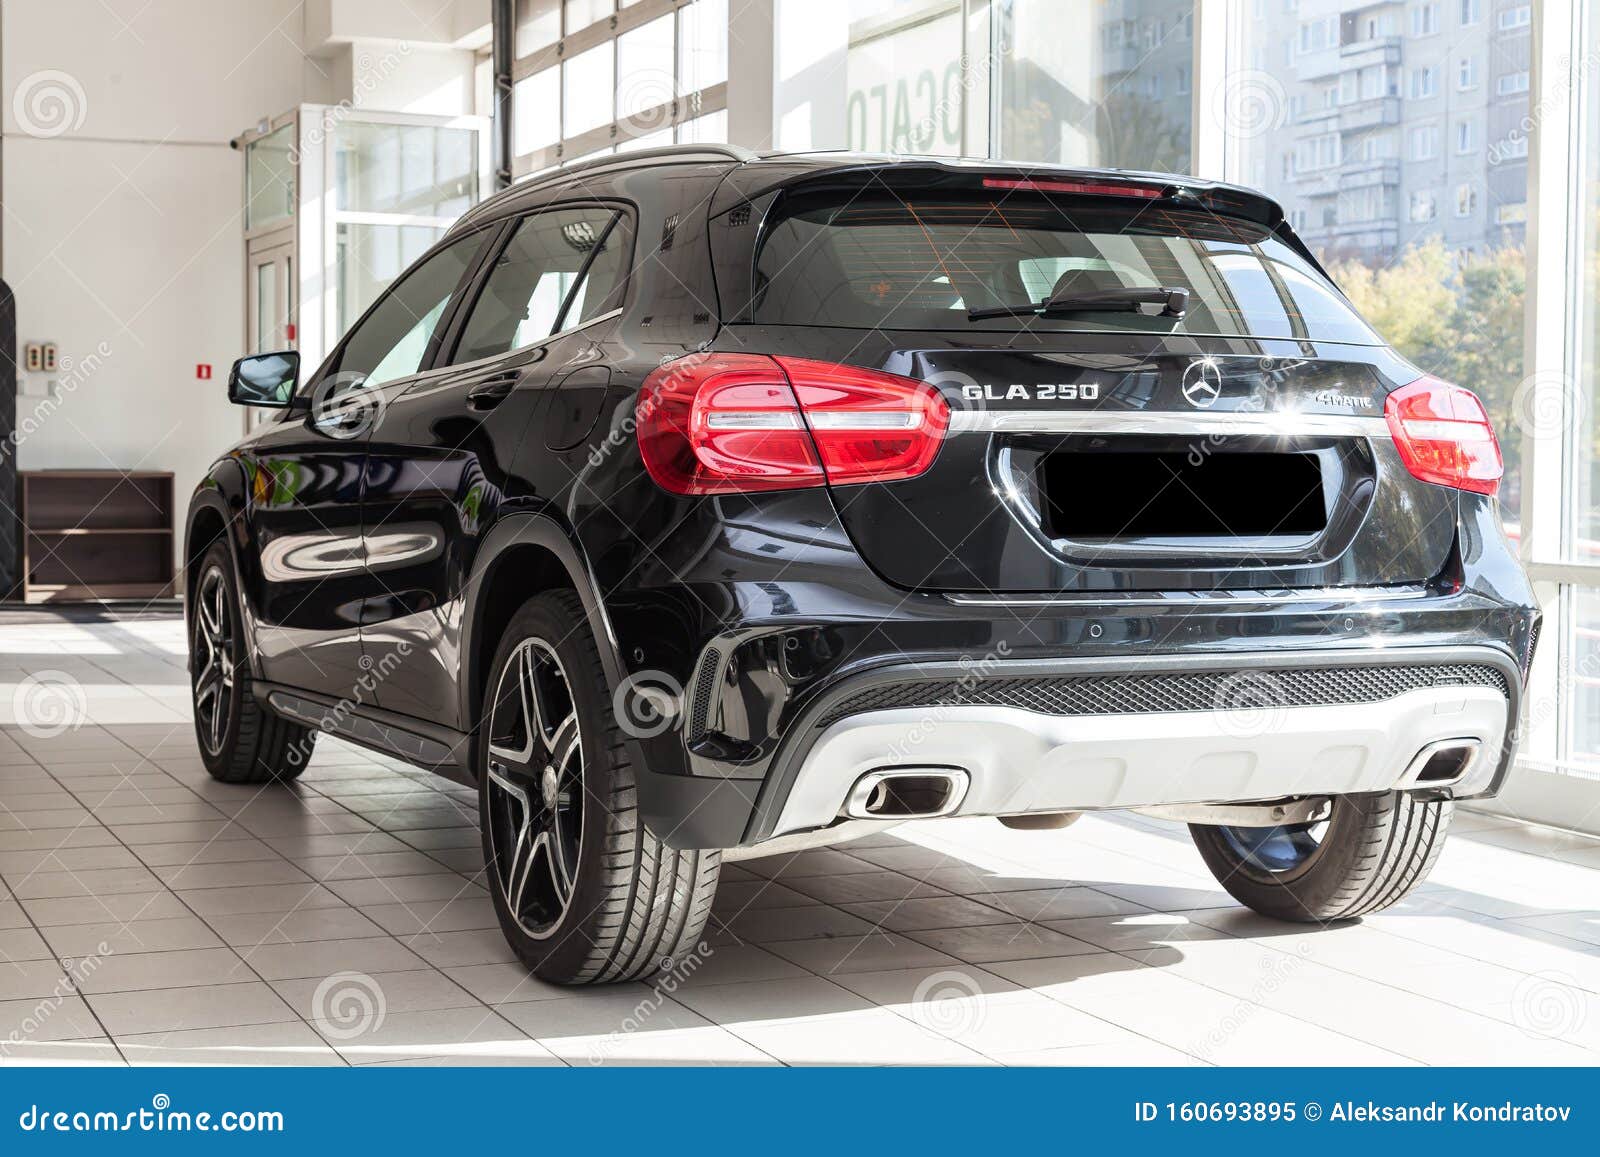 Black Mercedes Benz Gla Class 16 Year Rear View With Dark Gray Interior In Excellent Condition In A Dealership With White Walls Editorial Image Image Of Outdoors Parking